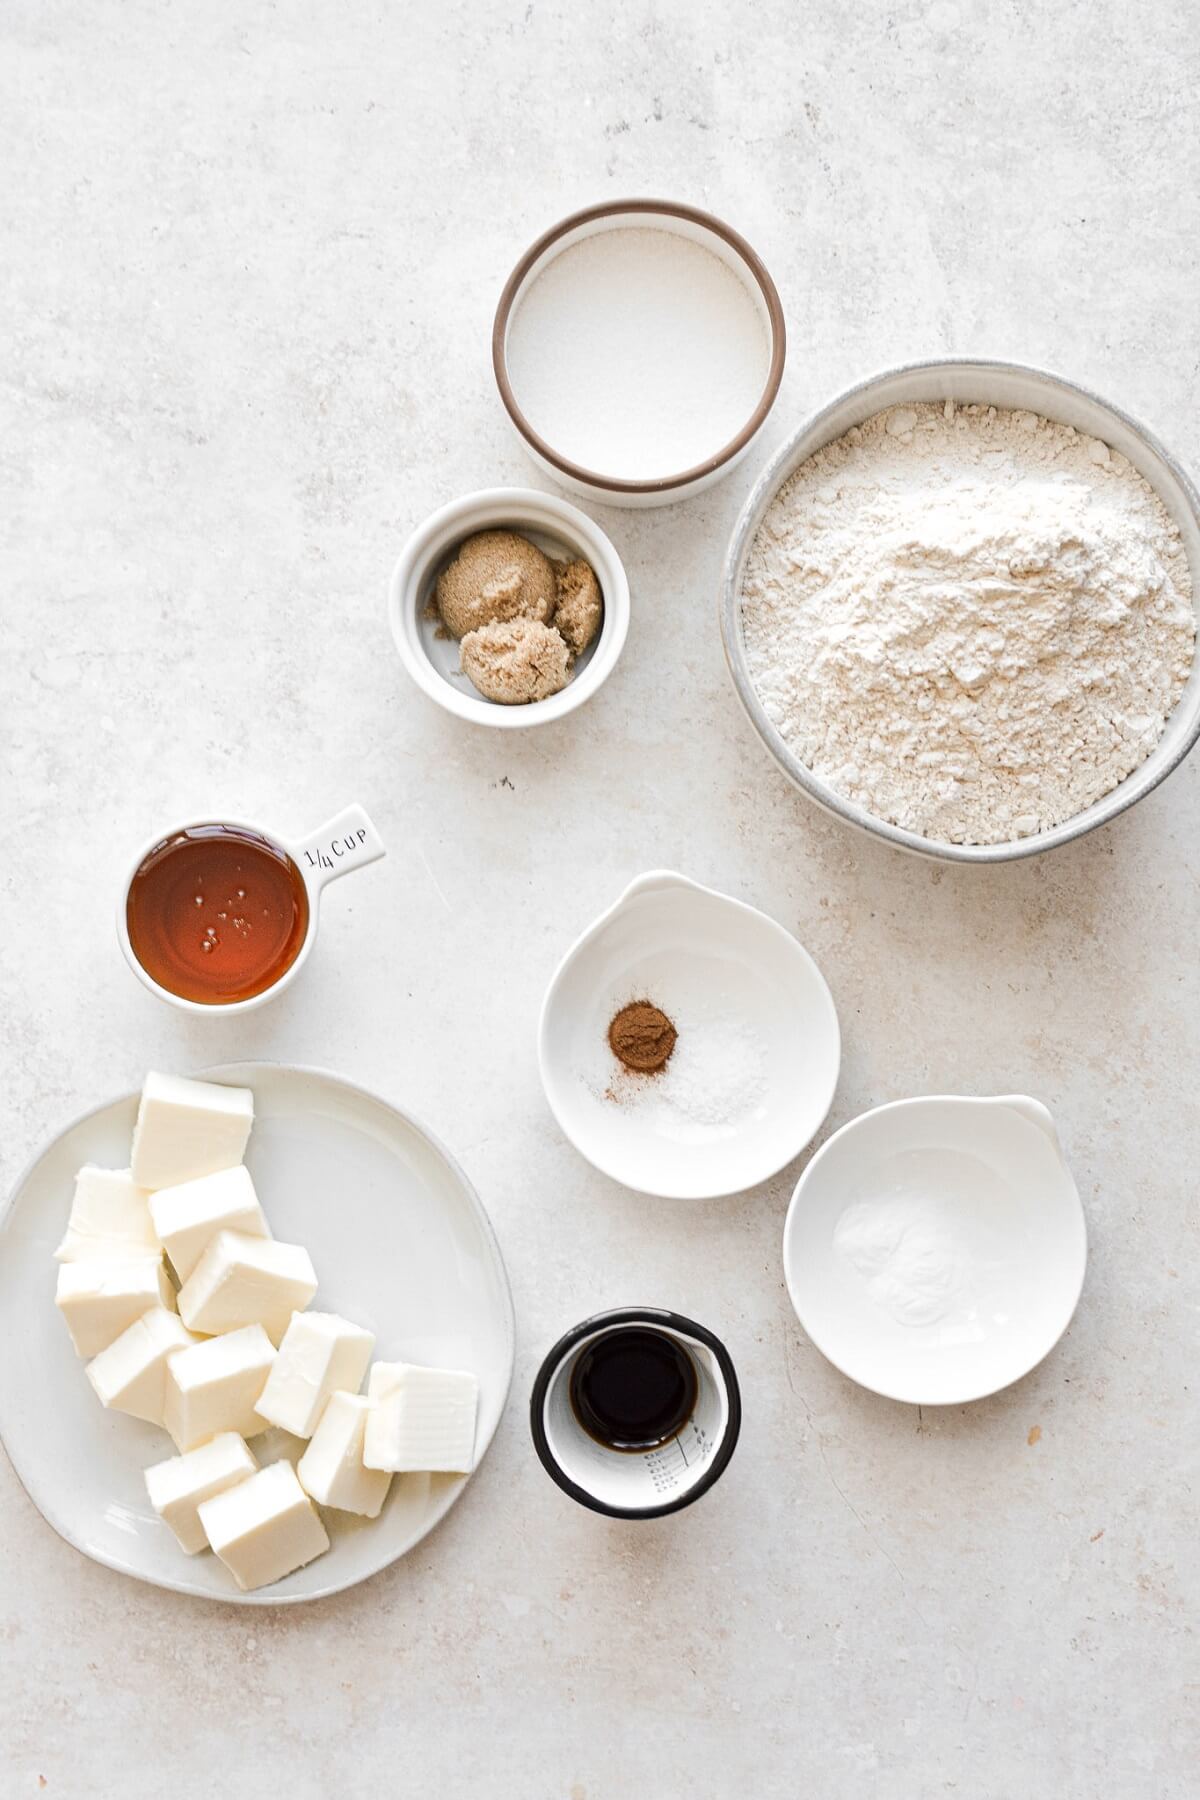 Ingredients for homemade graham crackers.